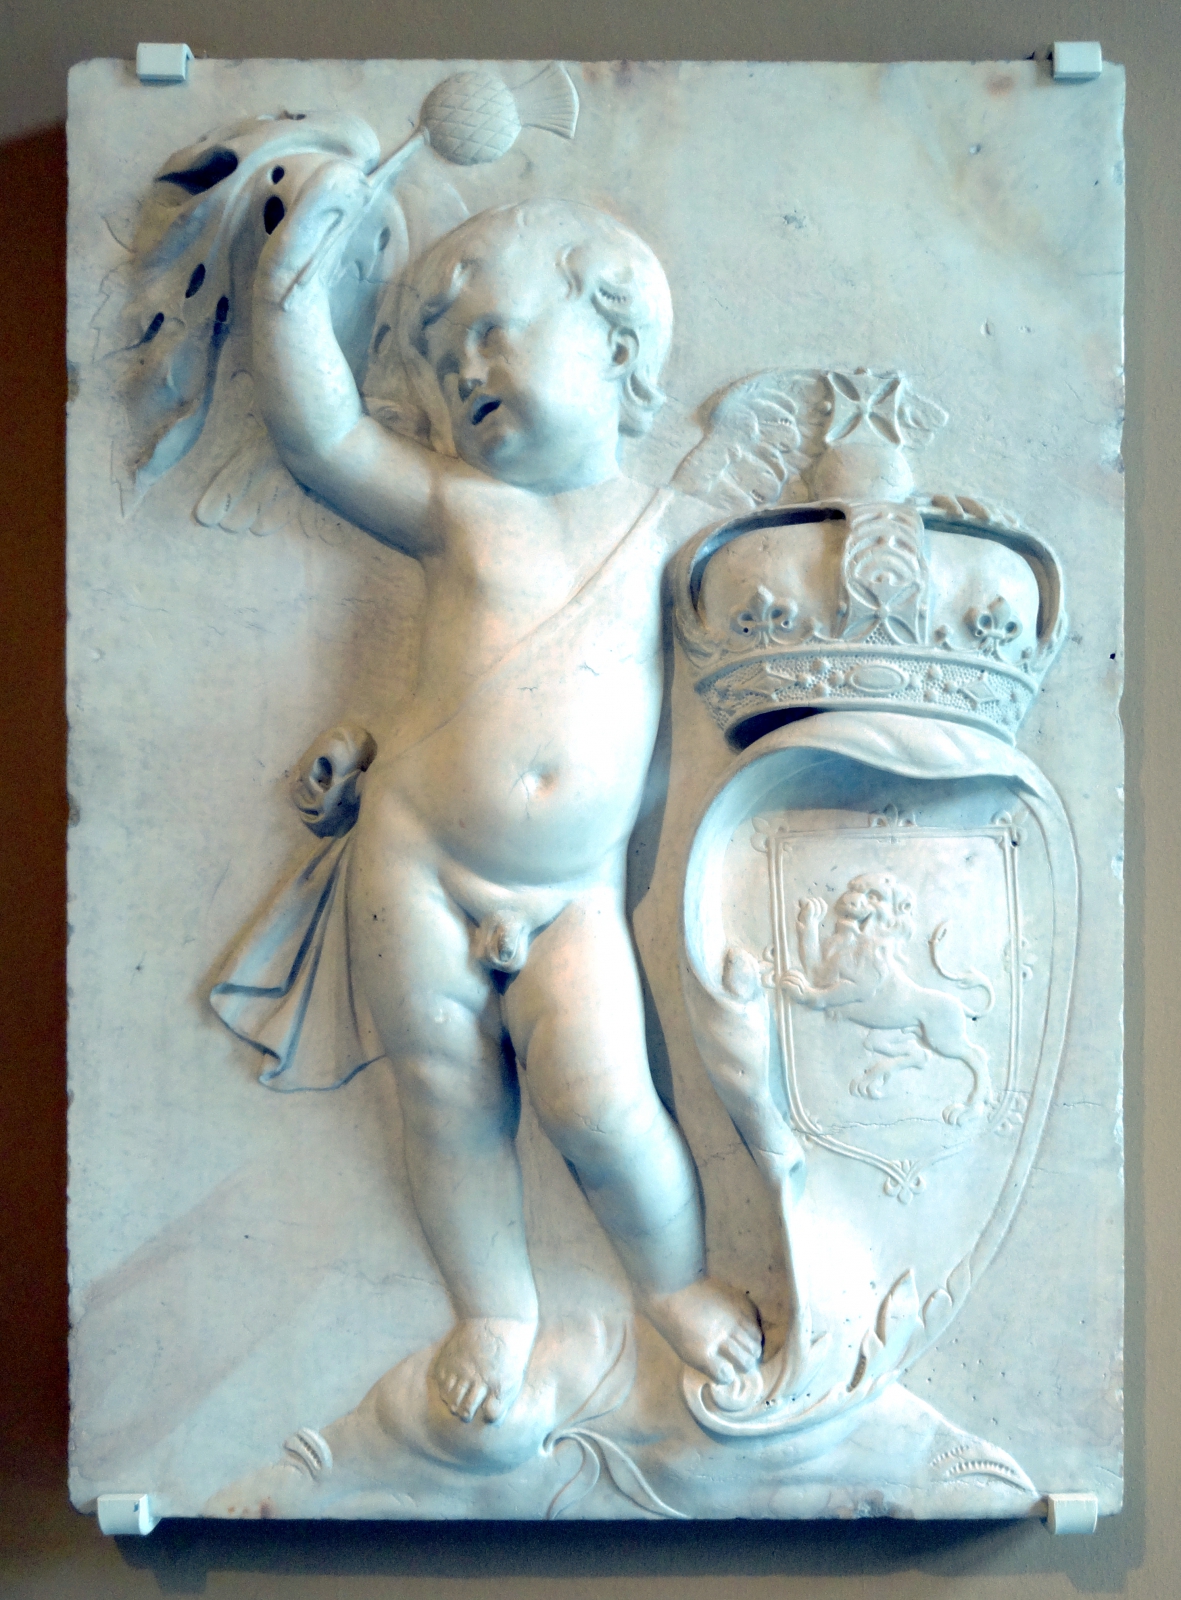 photo of a putto in stone relief